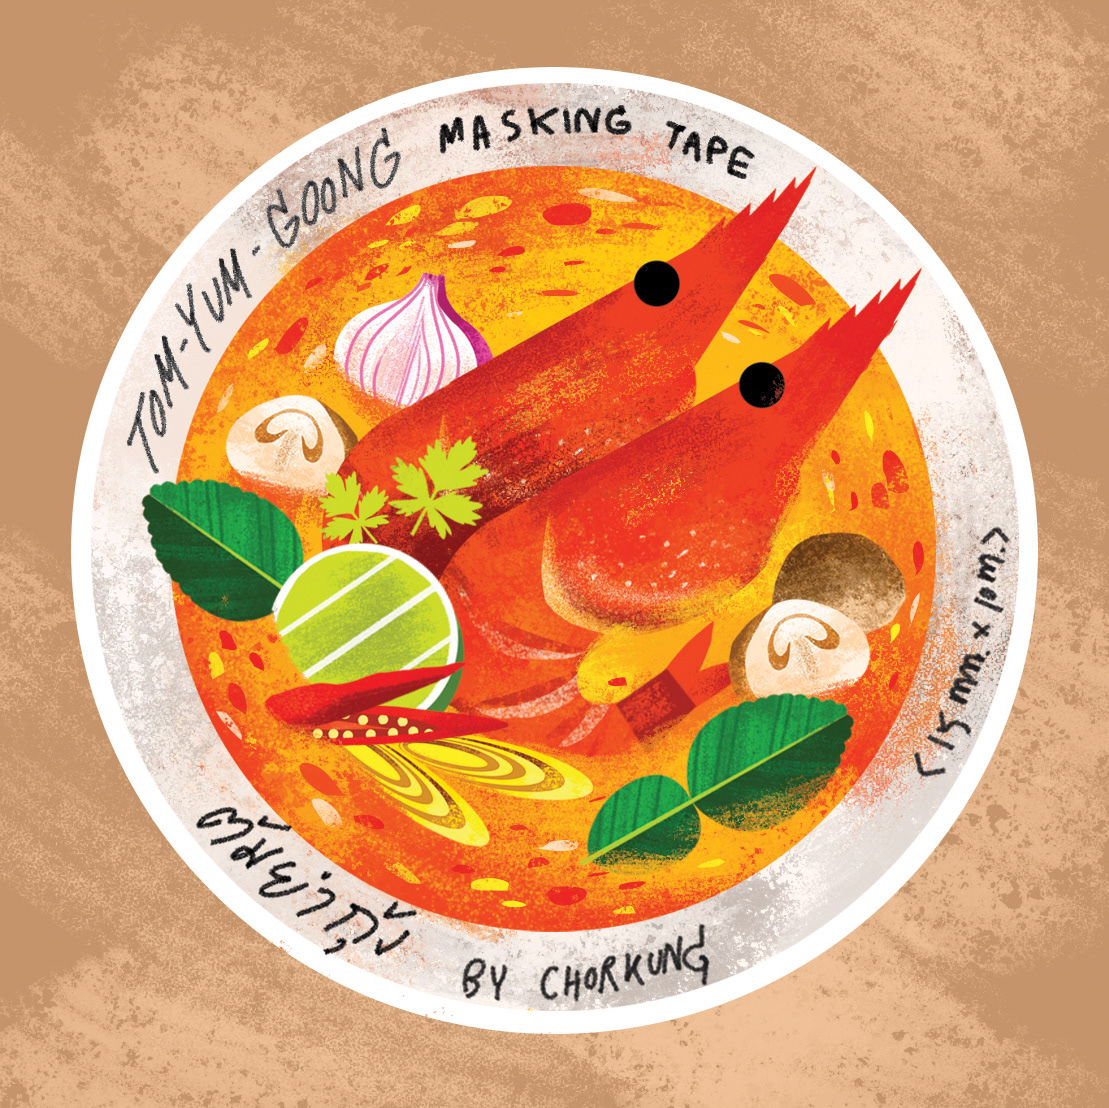 THAI FOOD' washi tape (Personal Project) on Behance